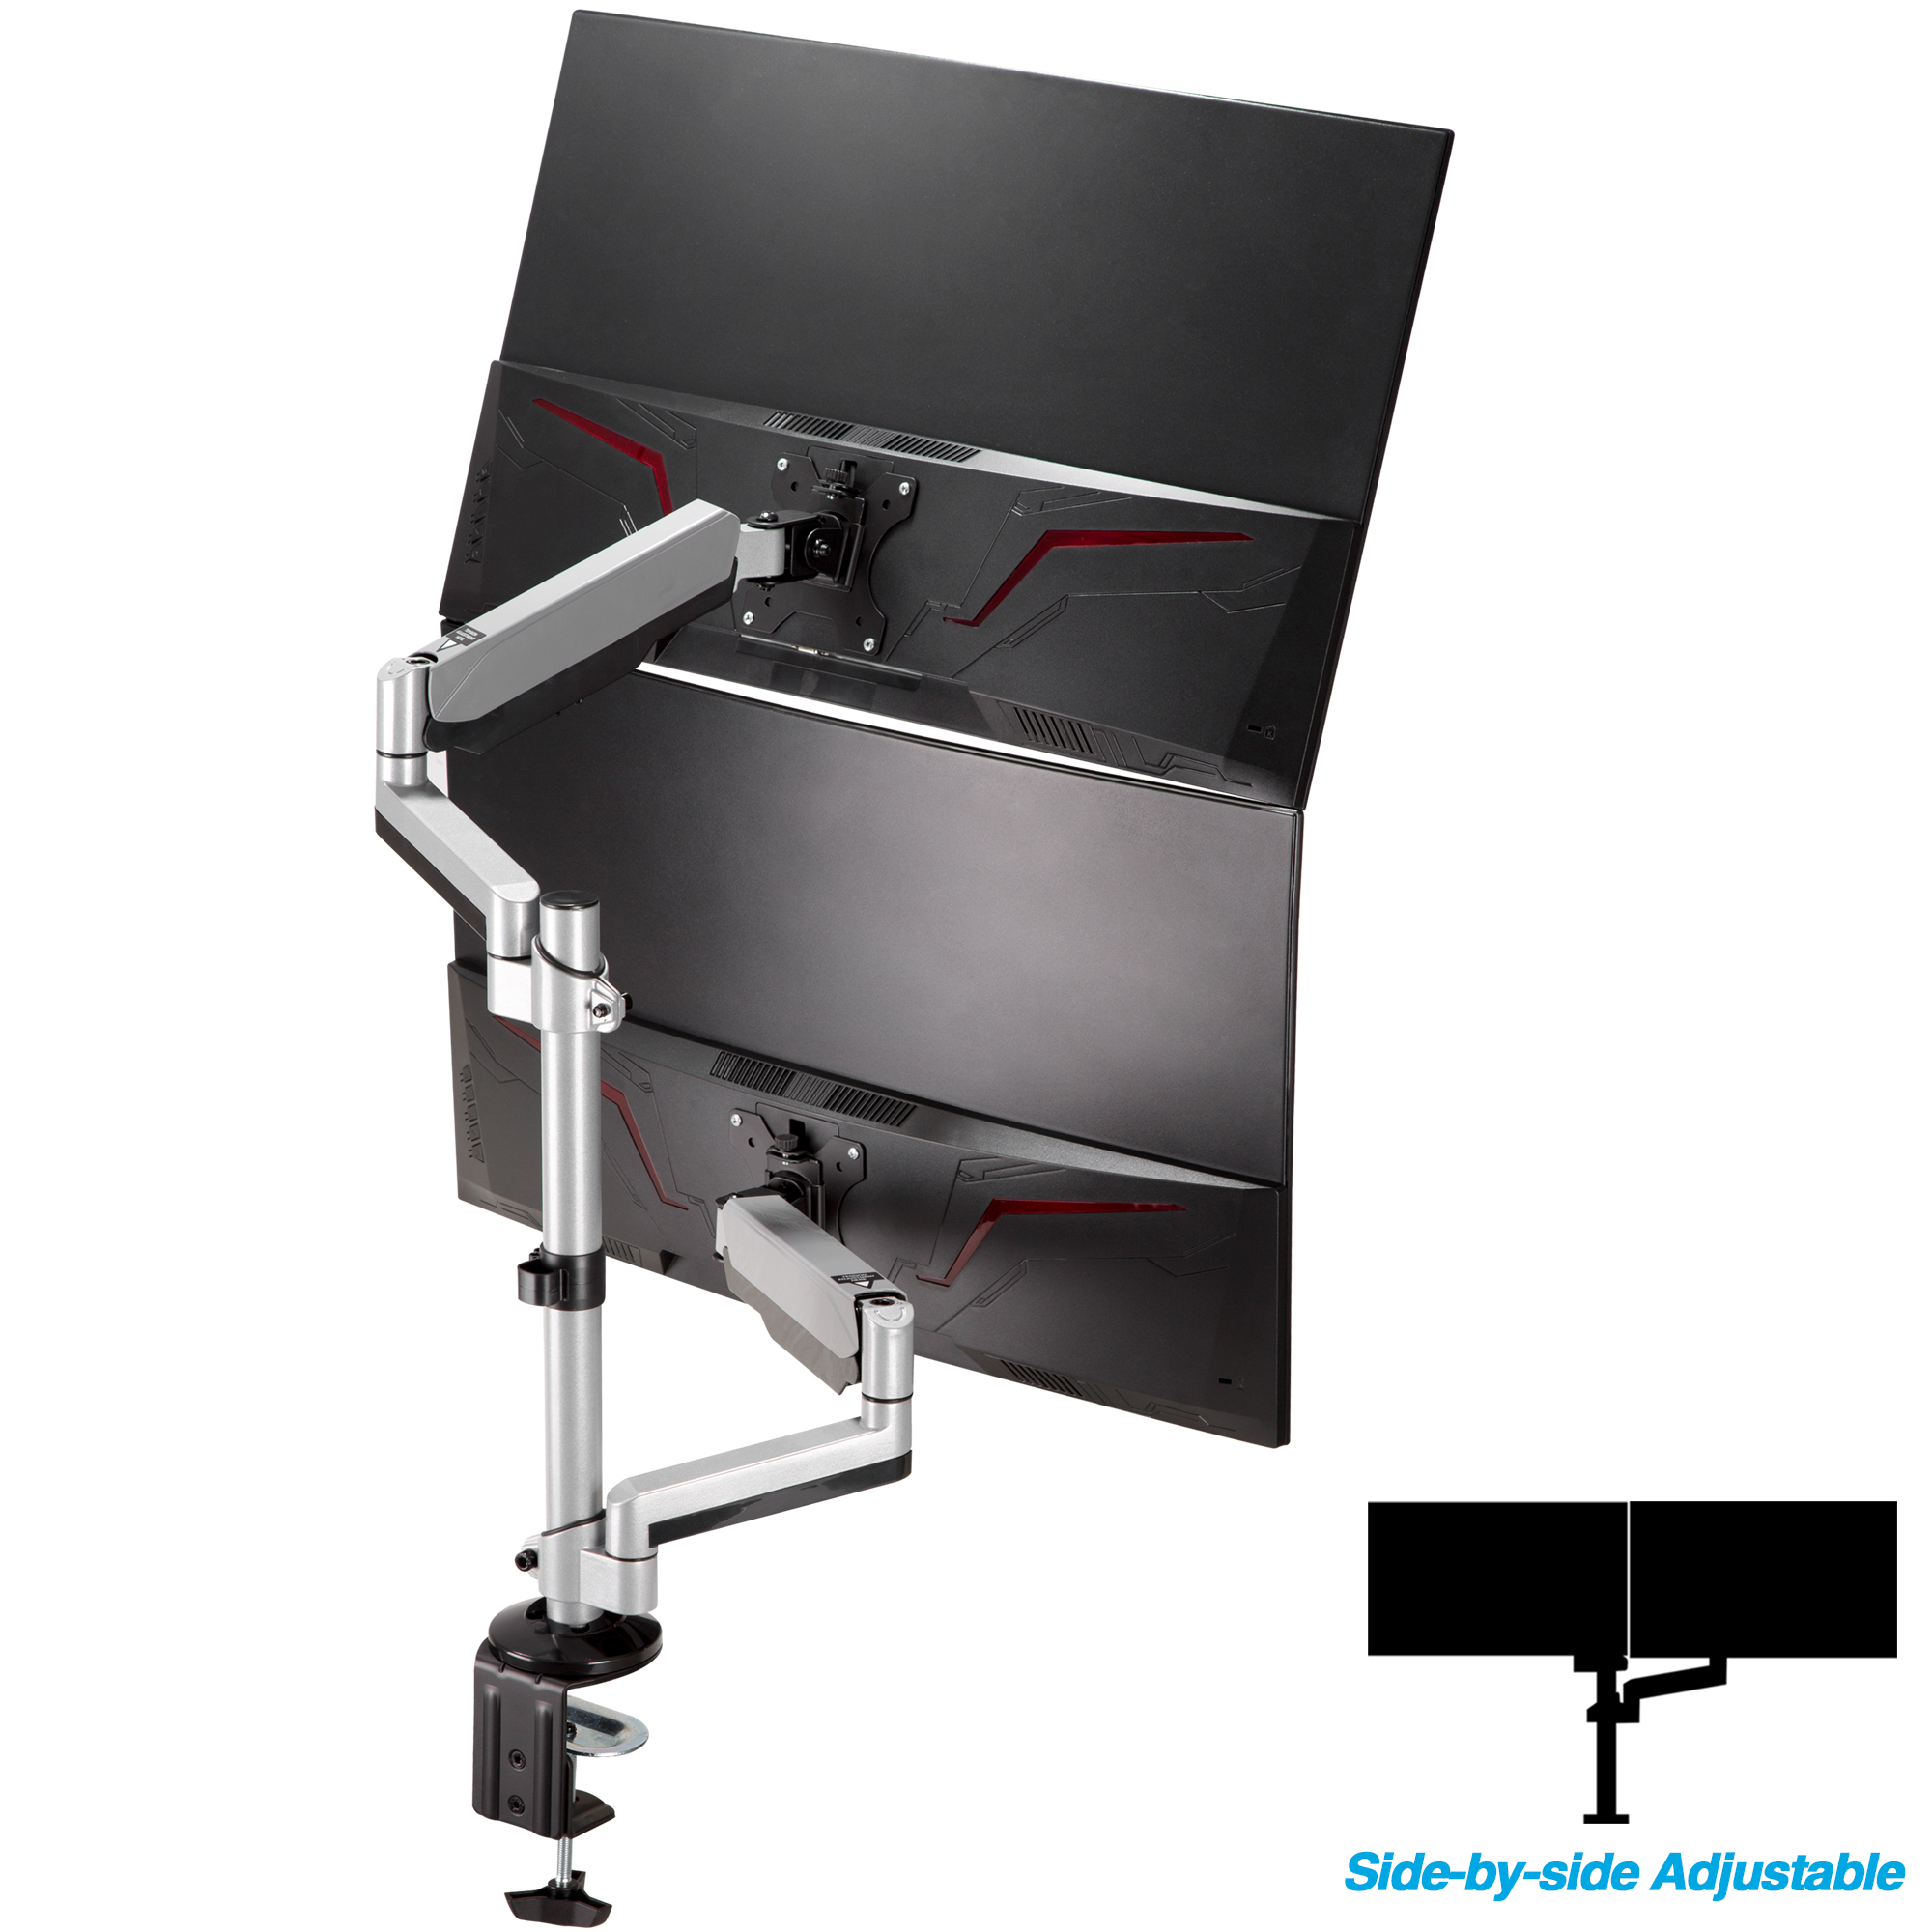 AVLT Dual 17-32 Stacked Monitor Arm Desk Mount fits Two Flat/Curved  Monitor Full Motion Height Swivel Tilt Rotation Adjustable Monitor Arm -  Extra Tall/VESA/C-Clamp/Grommet, AVLT®